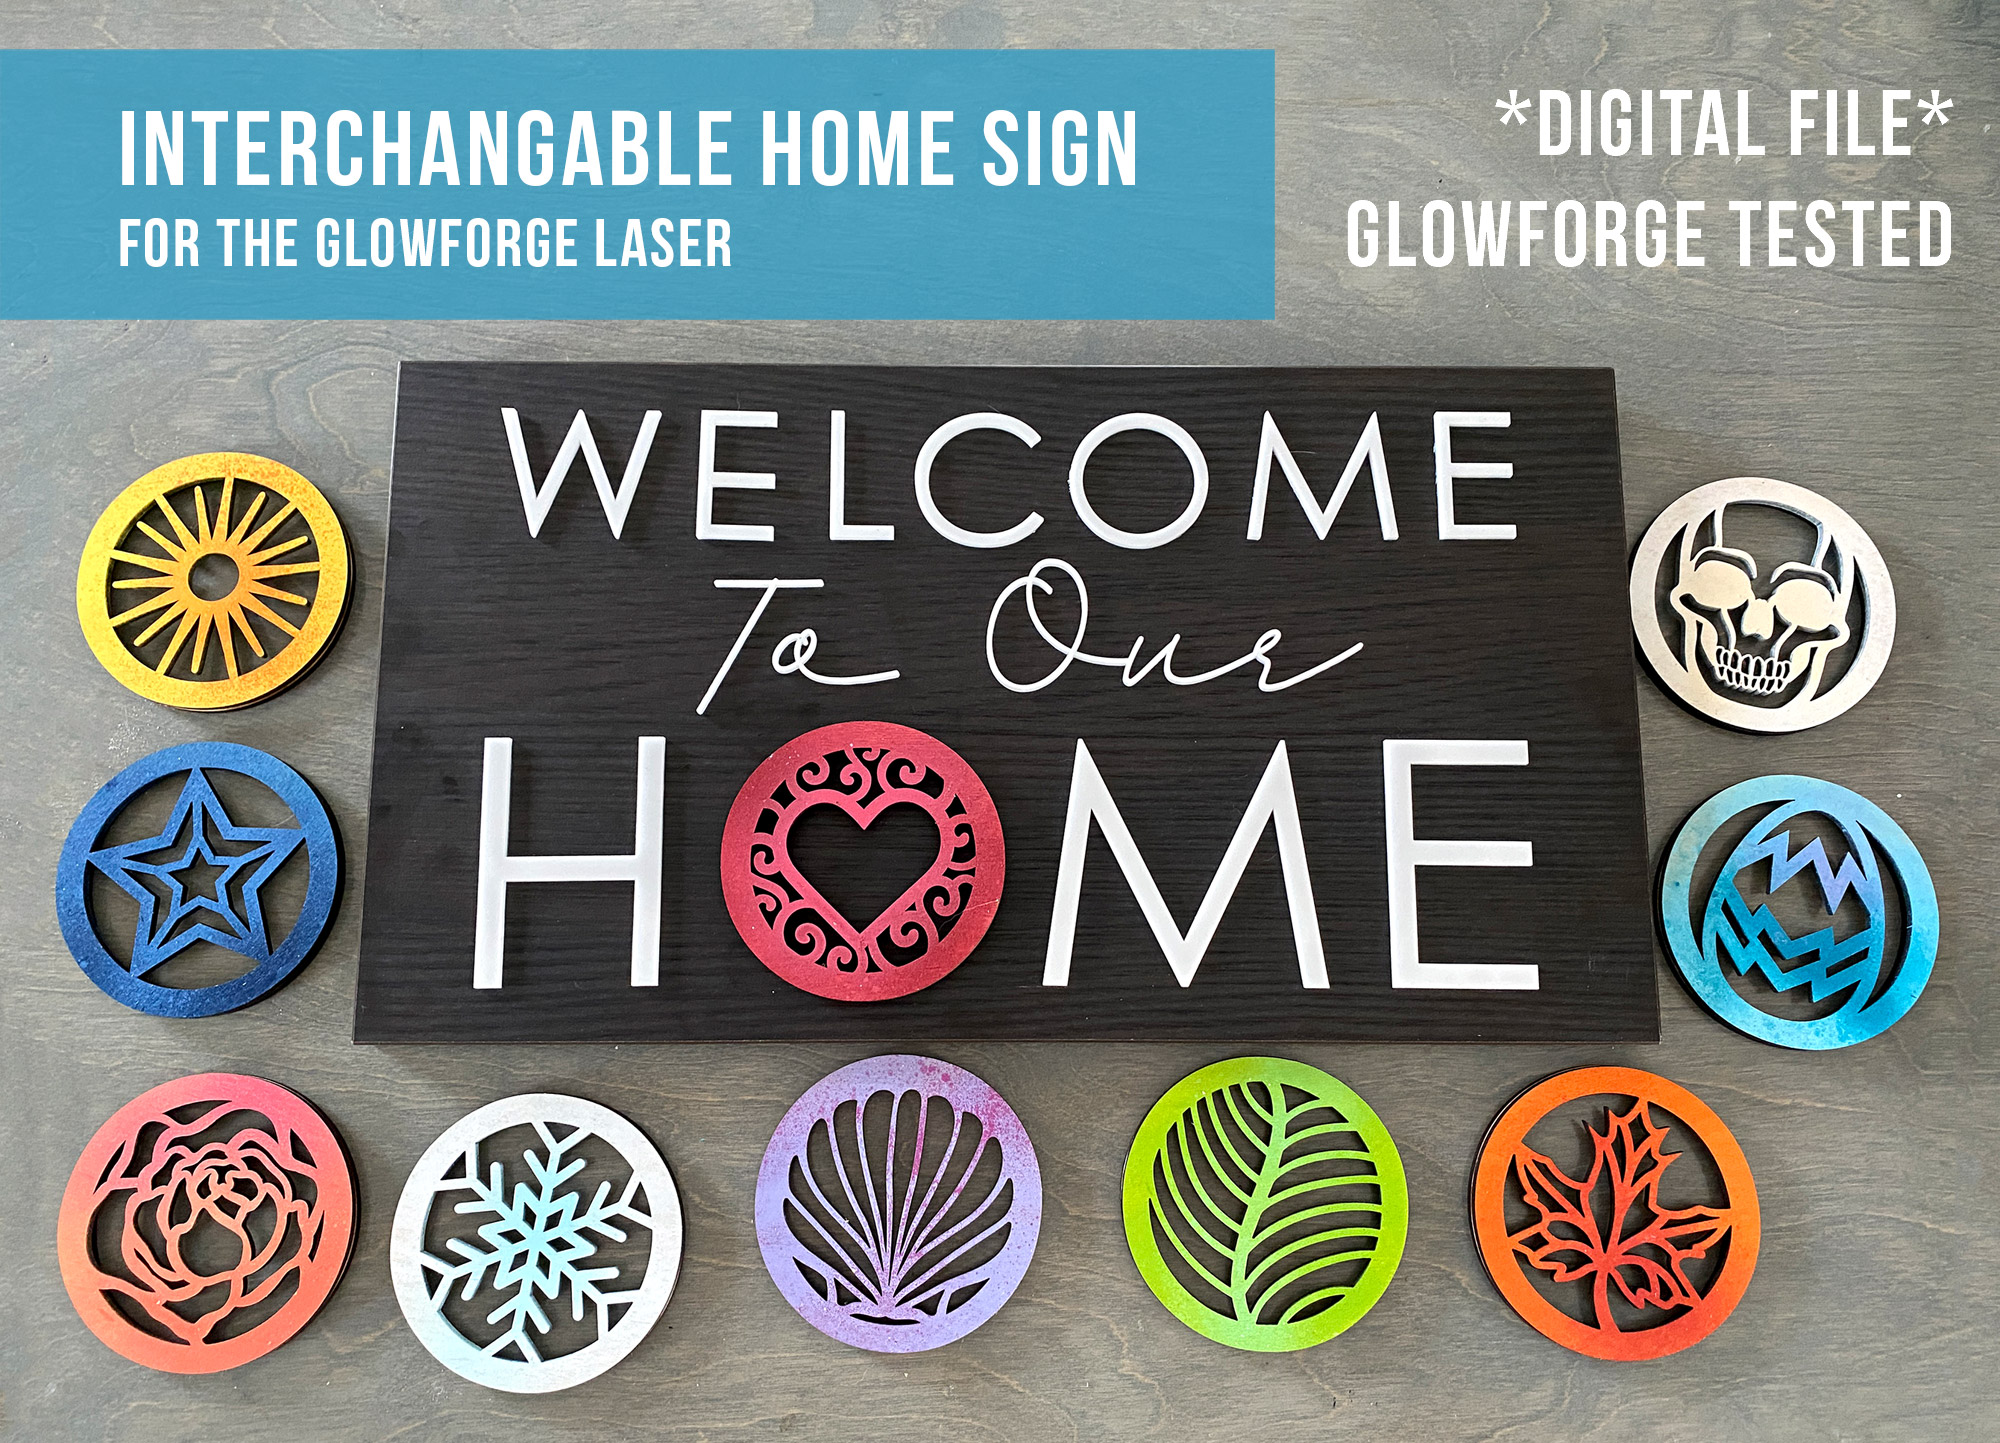 Interchangeable Home Sign – Tips & Assembly